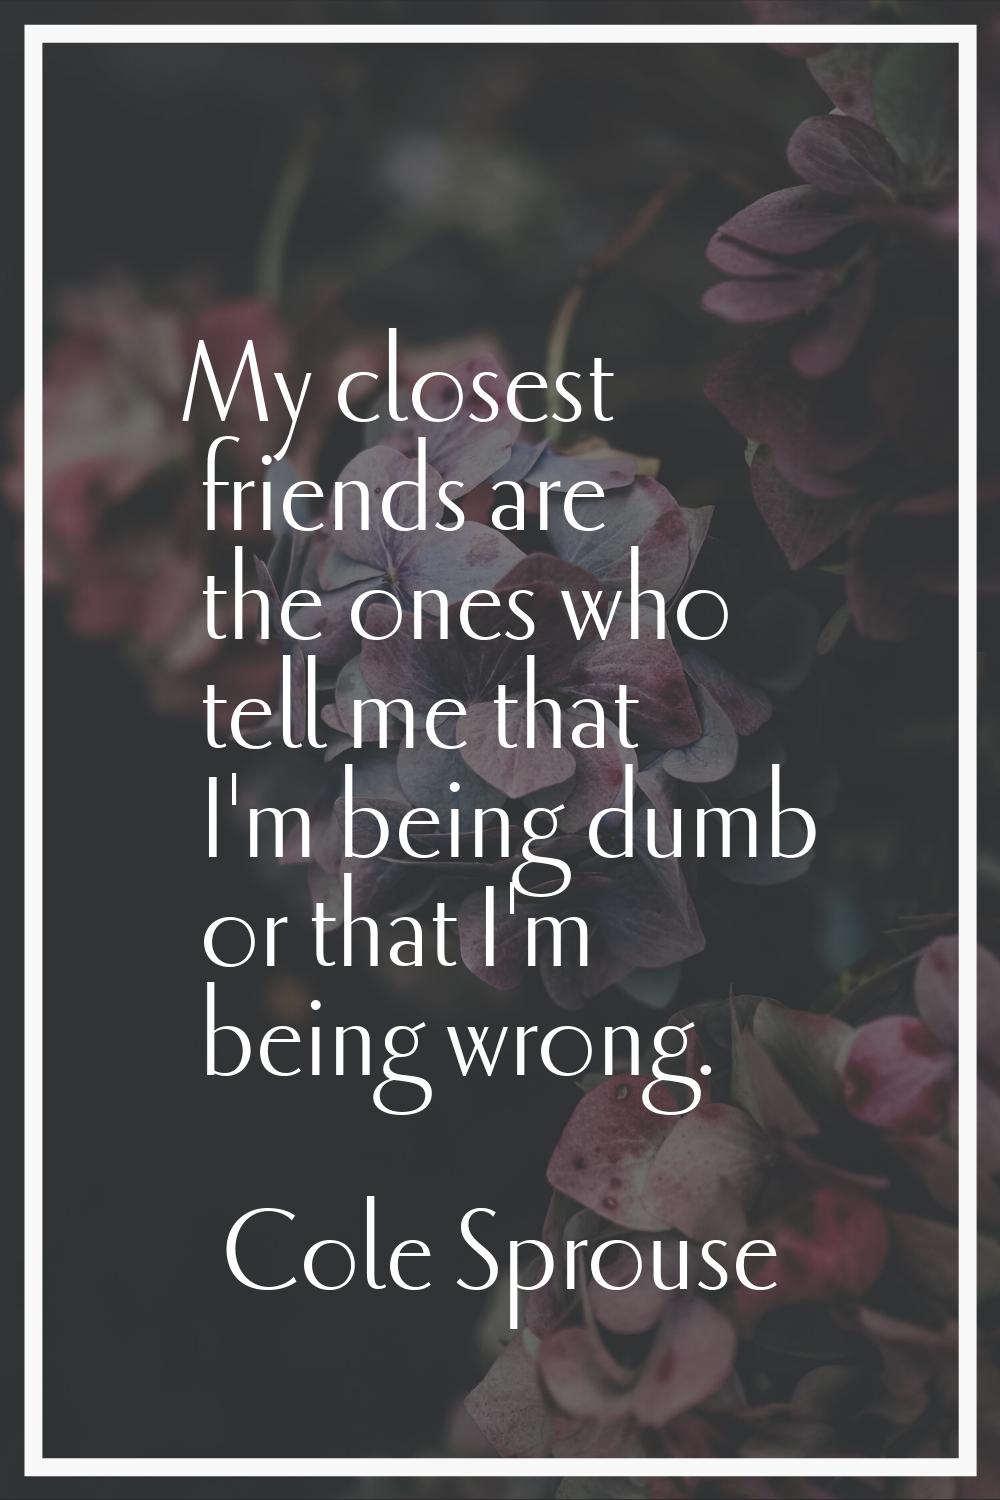 My closest friends are the ones who tell me that I'm being dumb or that I'm being wrong.